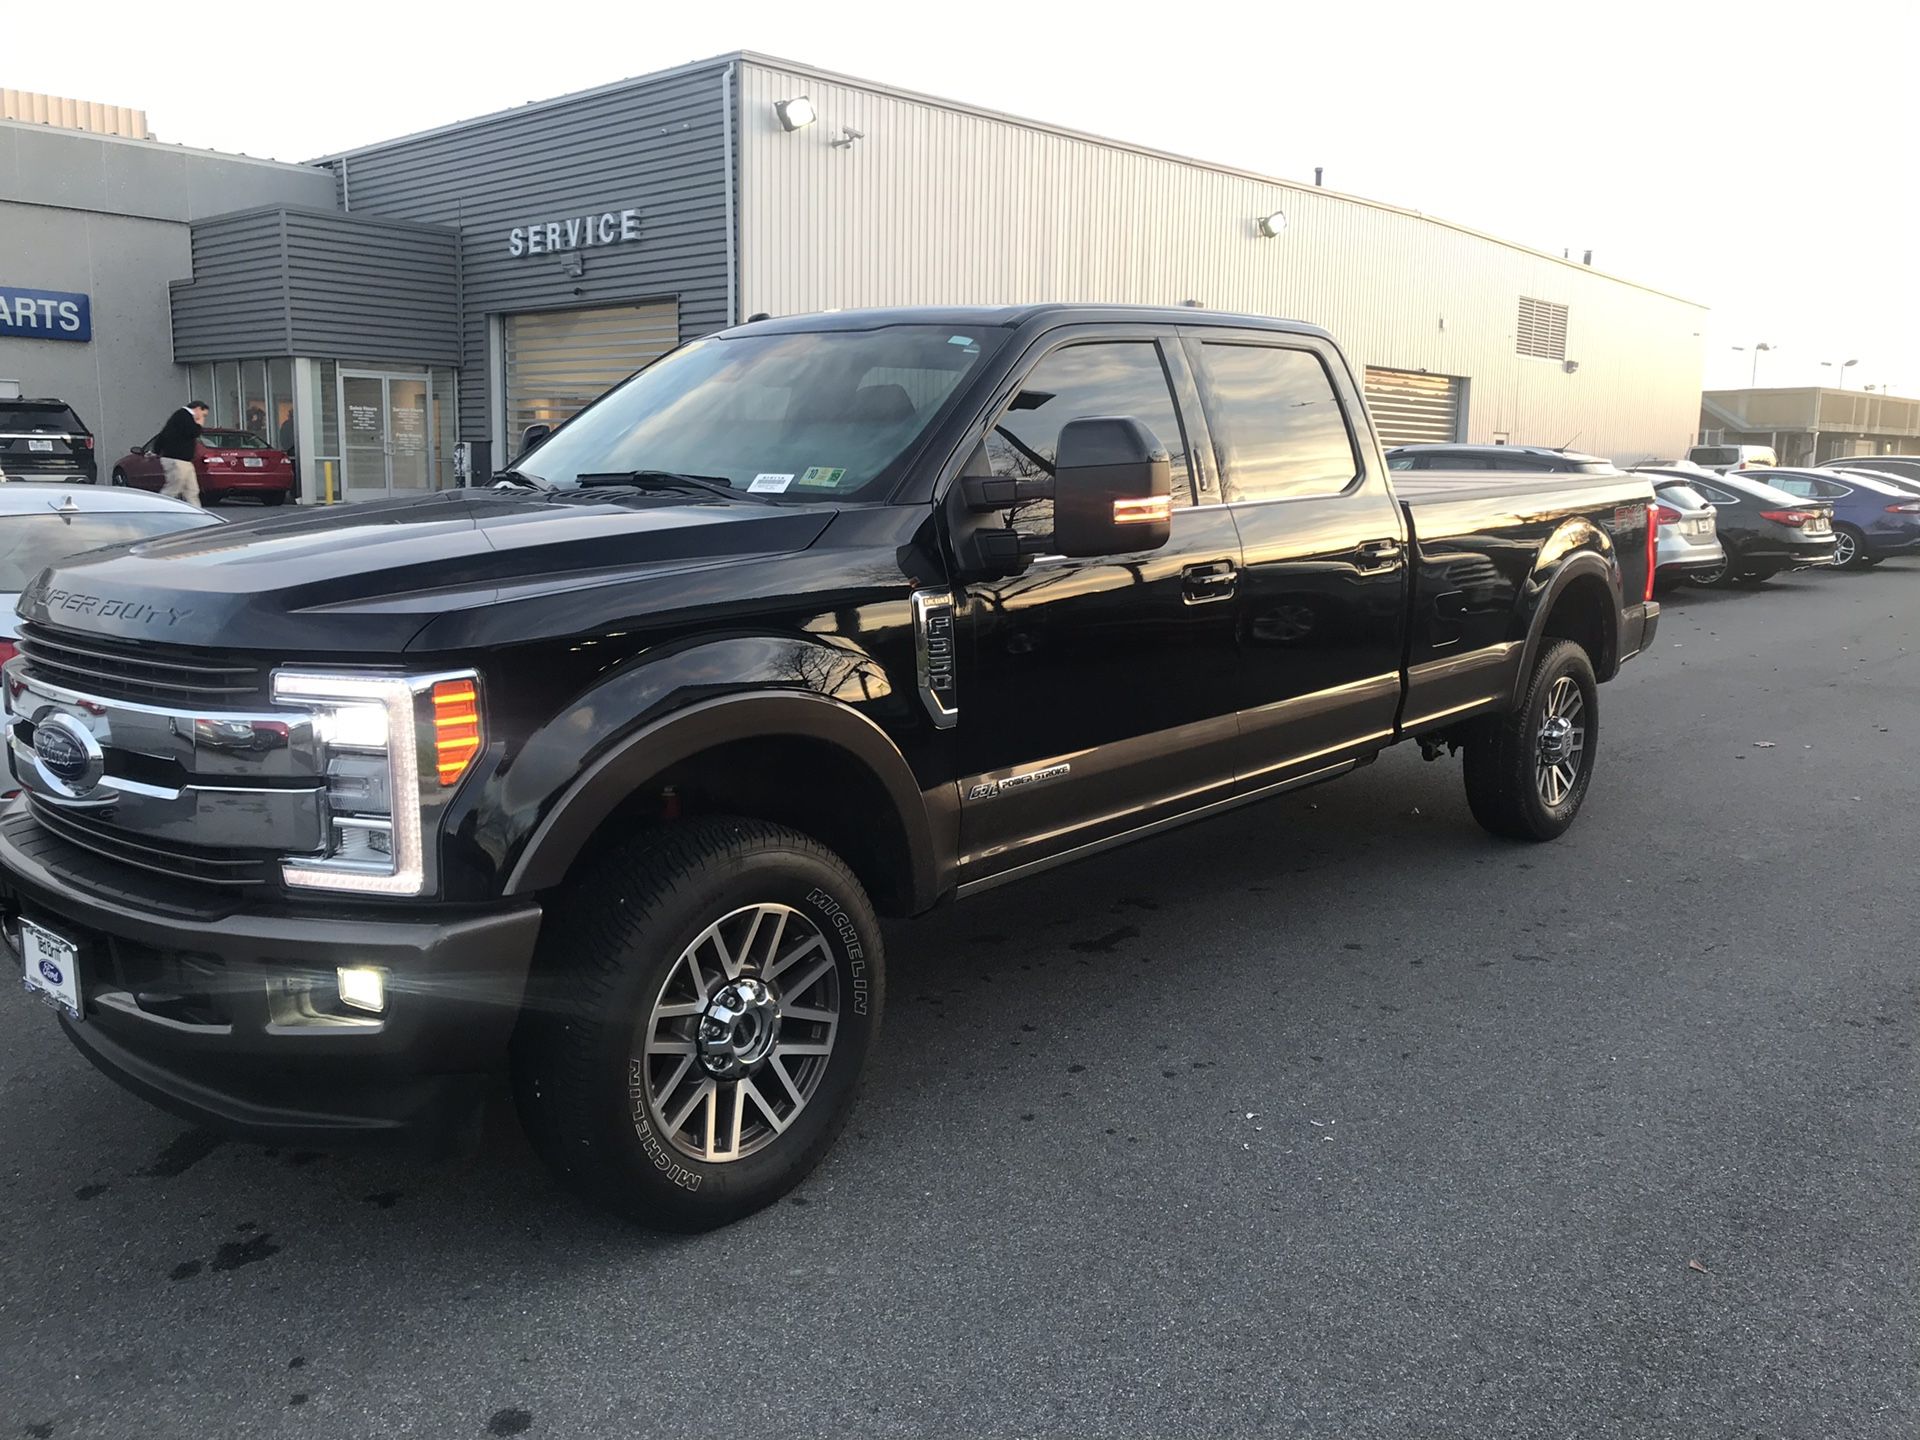 2017 Ford F-350SD King Ranch FX4 Off-Road Package Turbo Diesel with only 10,130 miles for $66,199!